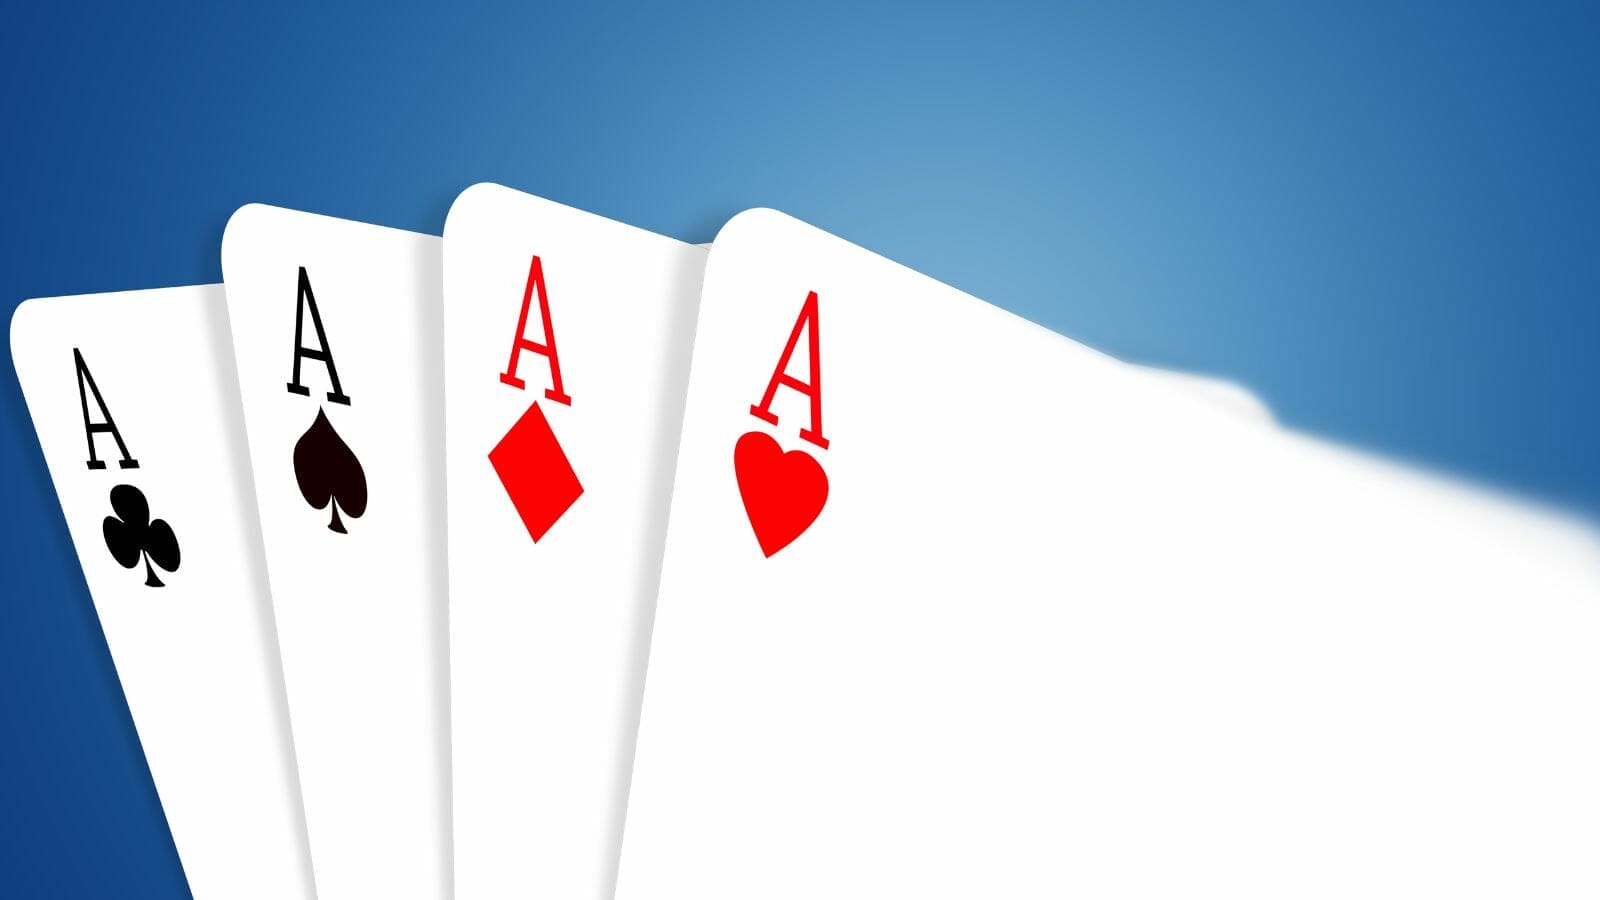 A close-up of a deck of cards

